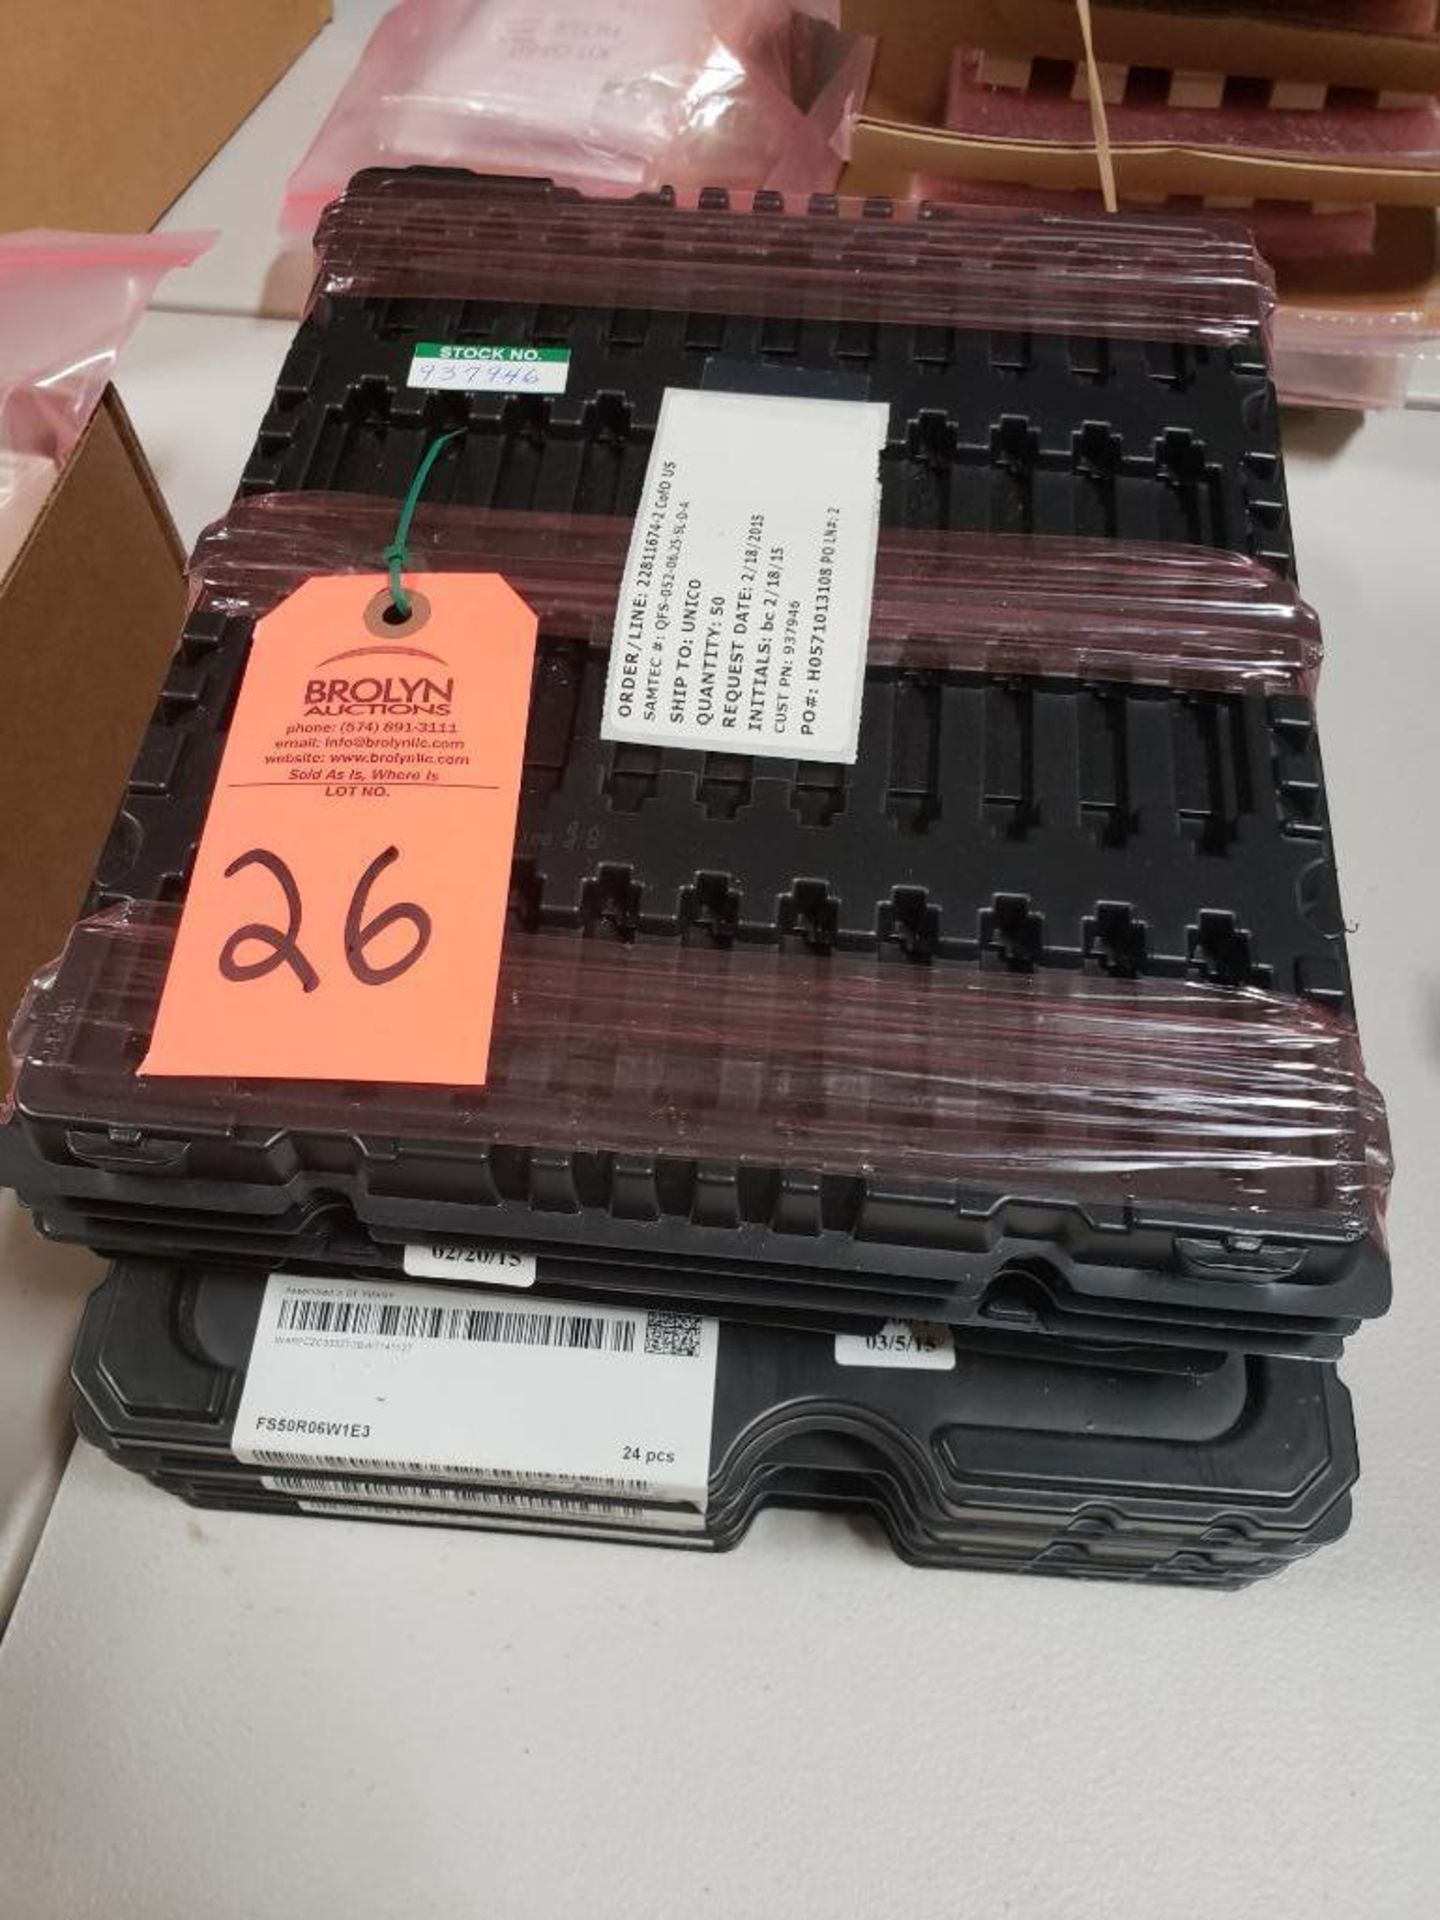 Qty 77 - Samtec QFS-052-06.25-SL-D-A. New in bulk package as pictured.